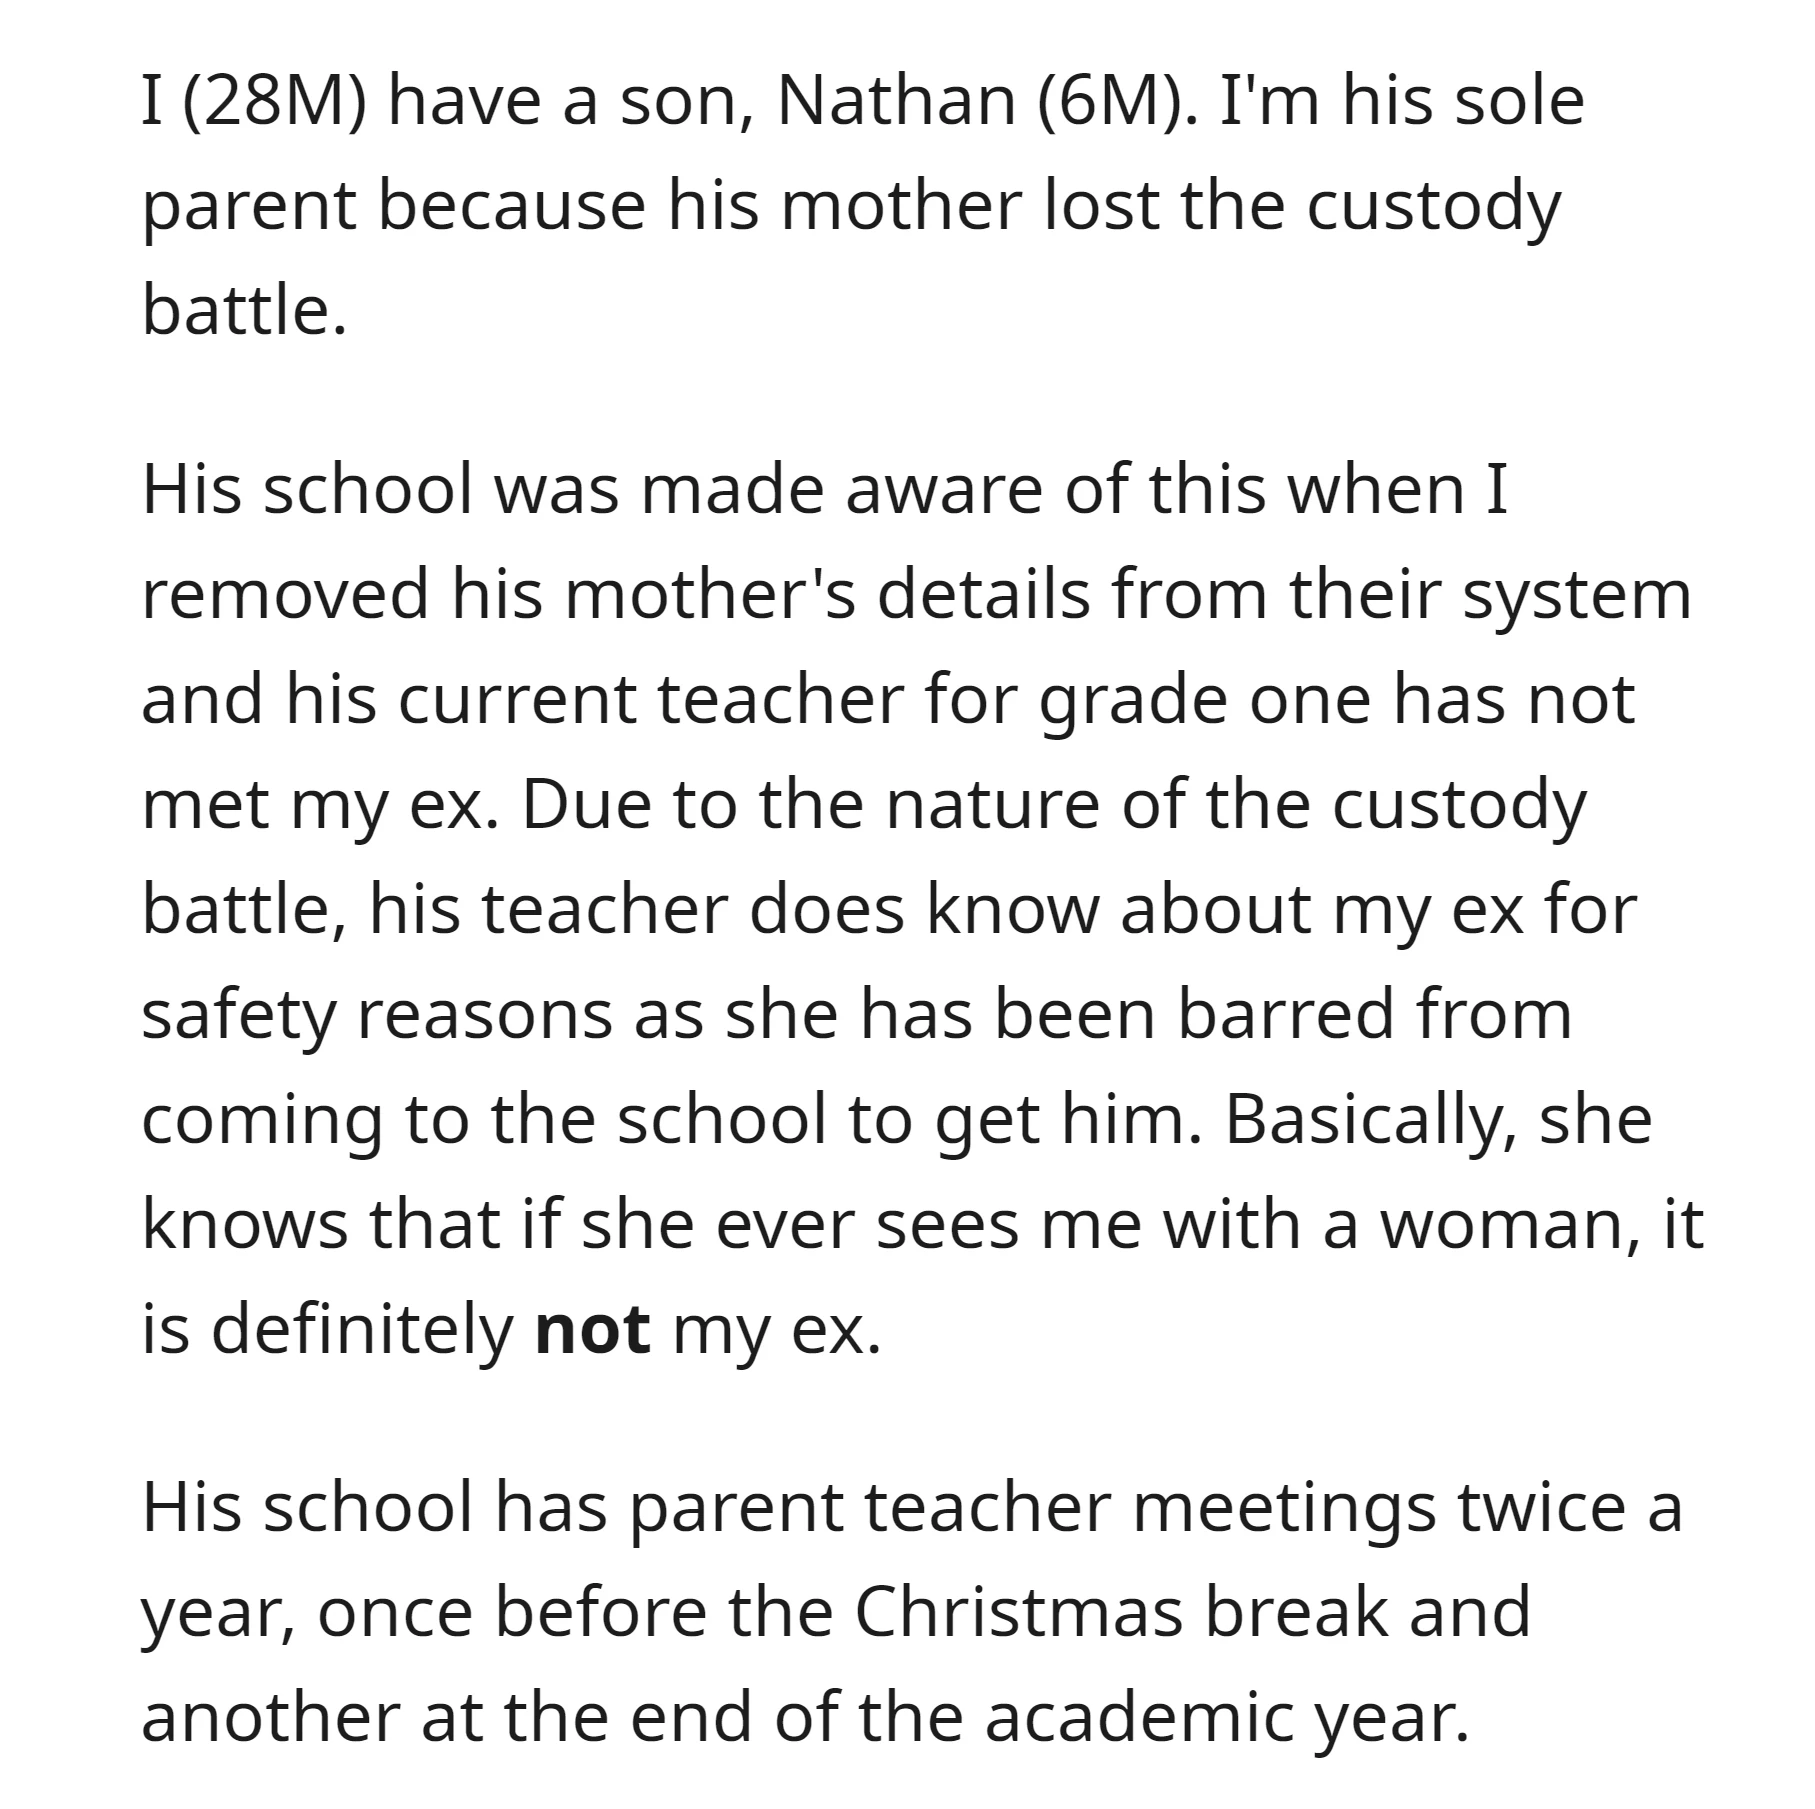 OP is the sole parent of his son, so he removed his mother's details from the school system